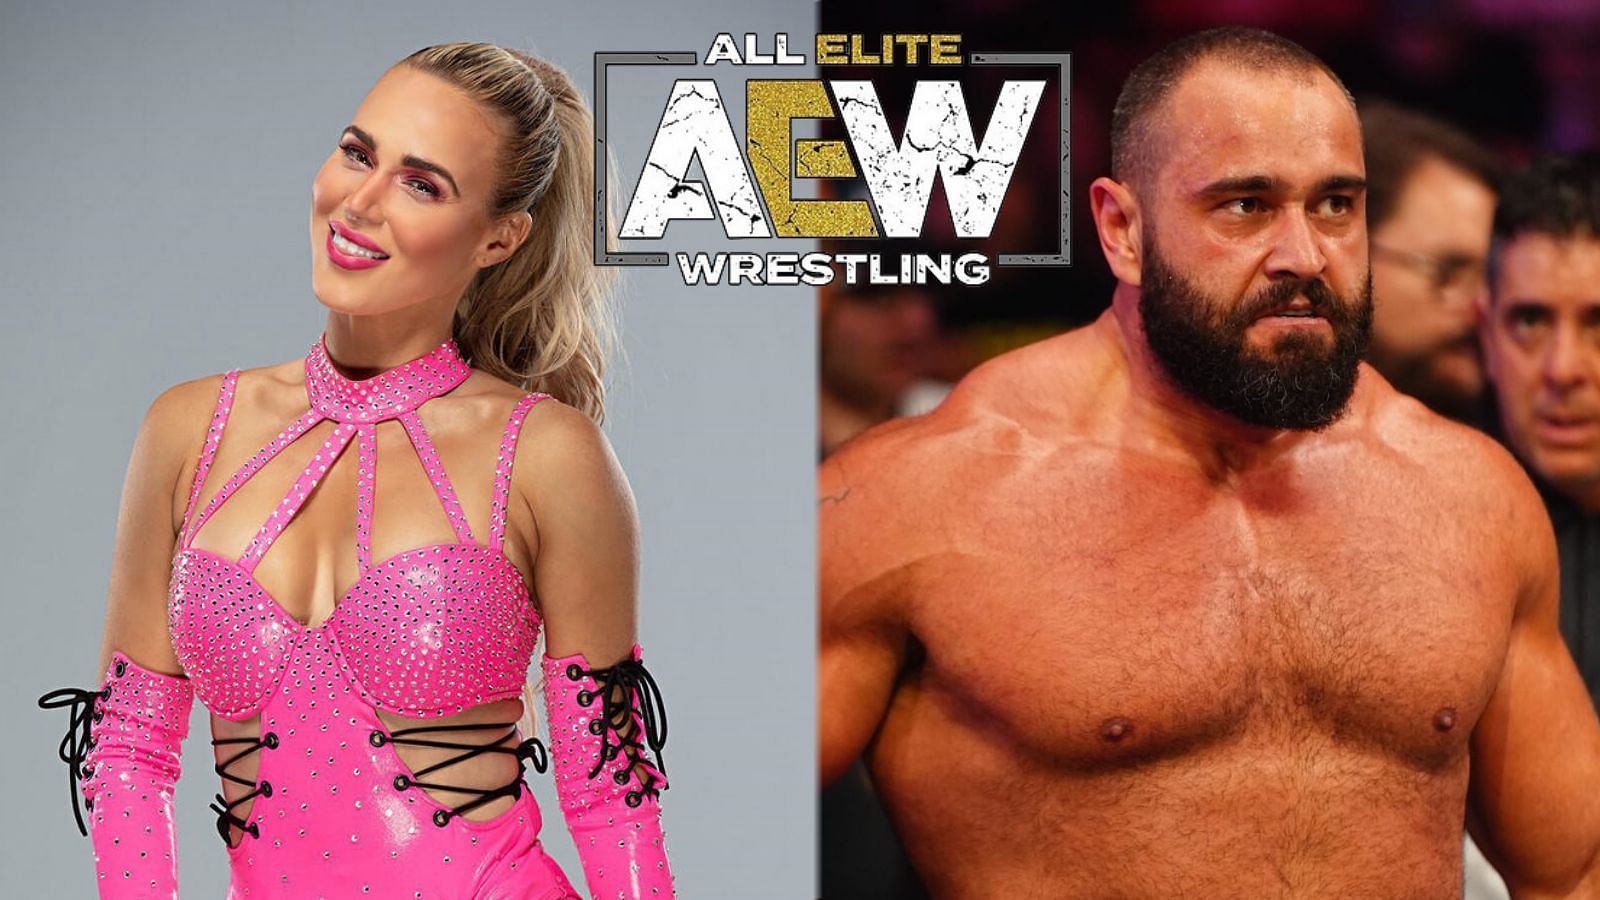 Could the couple be reuniting within AEW?